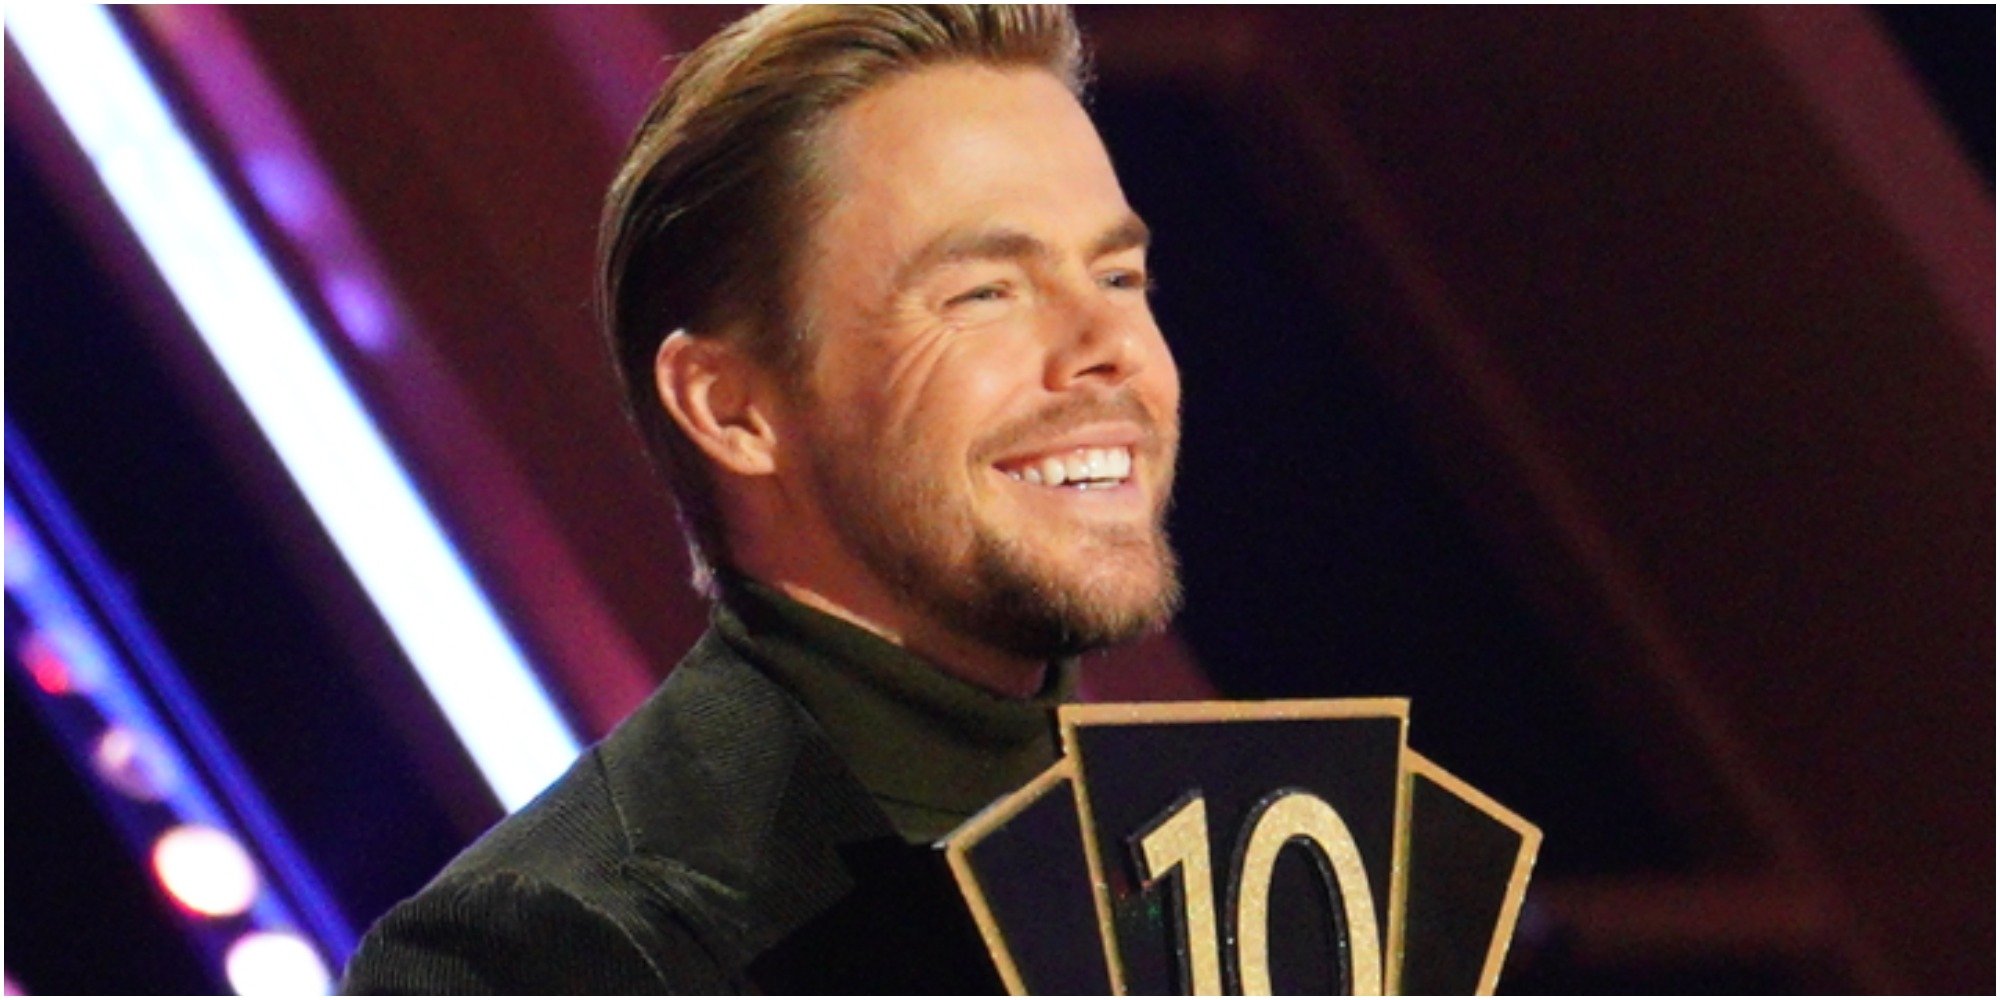 Derek Hough holds a 10 paddle on the set of DWTS.